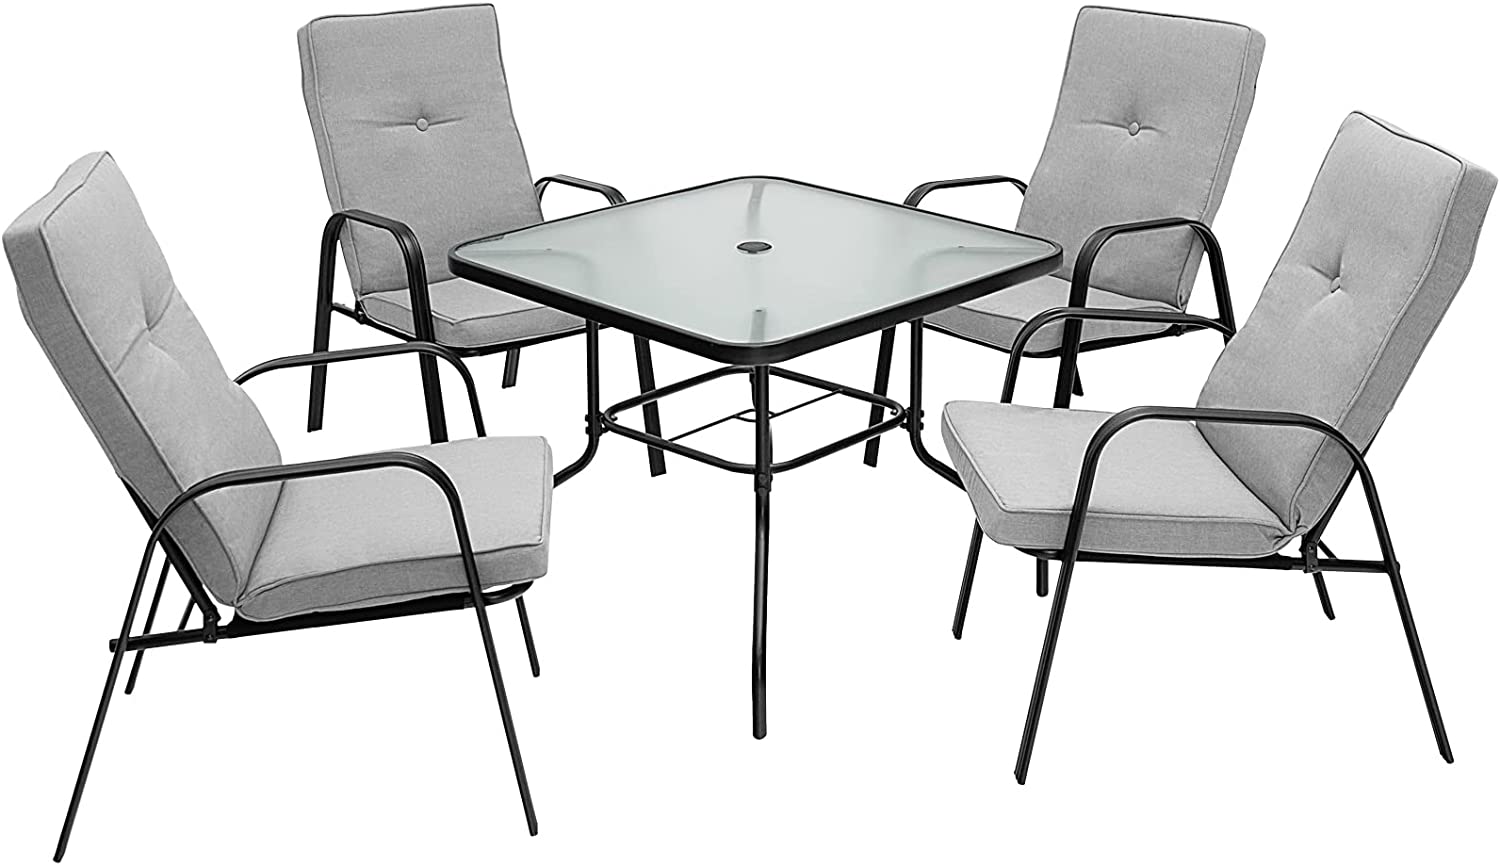 Giantex 4 Piece Patio Dining Chairs, Outdoor Stackable Chairs